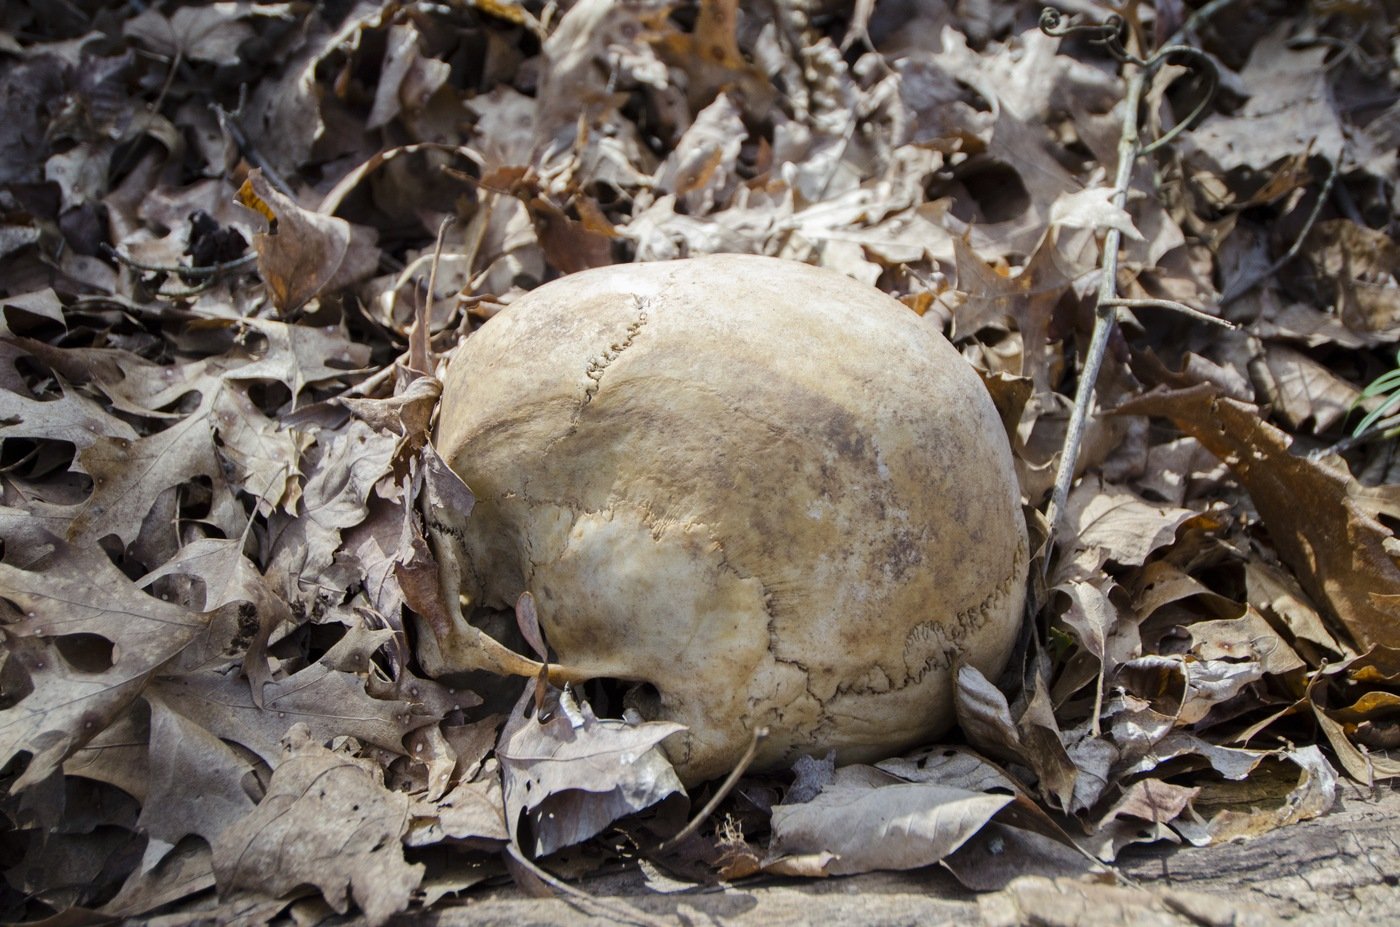 A donor's skull at the Anthropology Research Center in Knoxville, Tennessee, during the Human Remains Recovery course in March 2018.